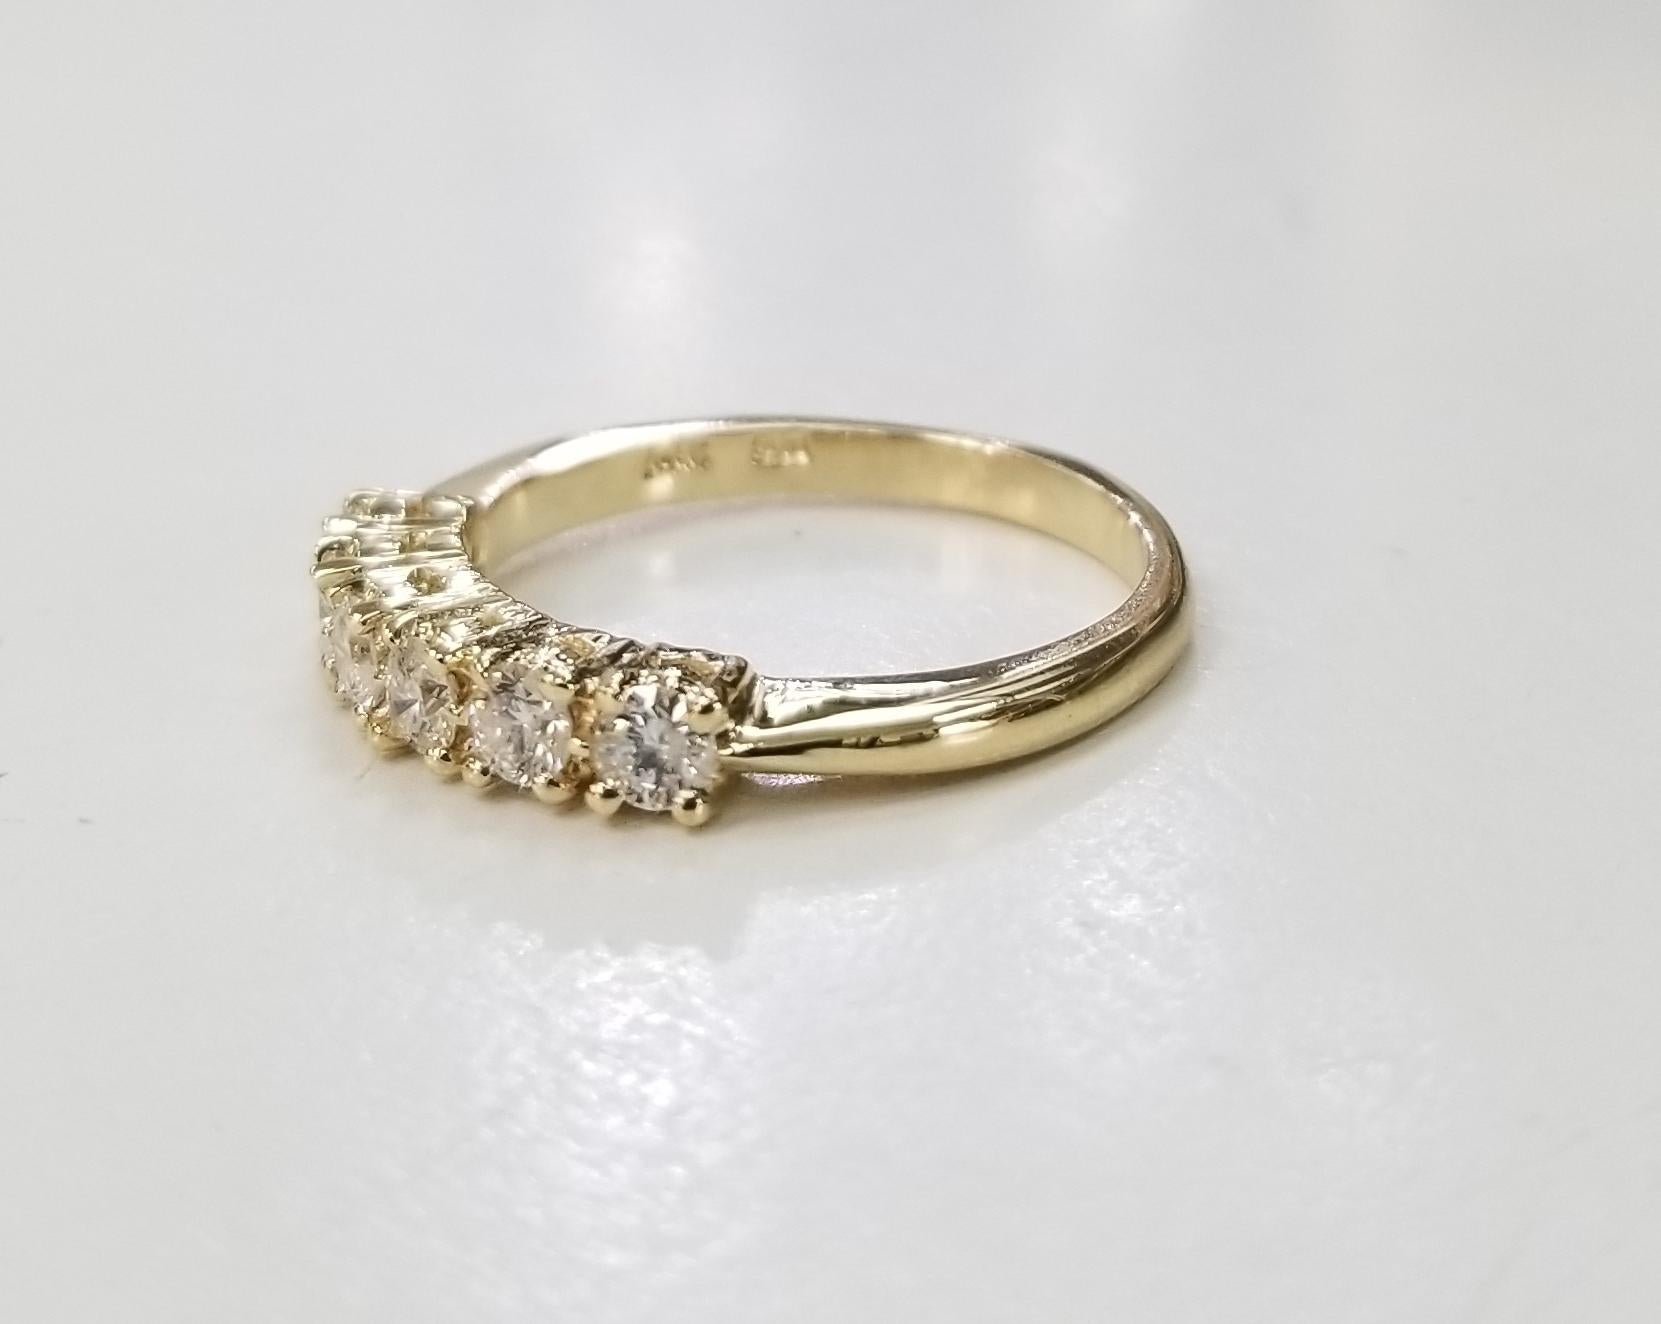 14k yellow gold 6 diamond ring wedding anniversary ring .52pts., containing 6 round full cut diamonds of very nice quality weighing .52pts.  ring size is 7 and can be sized to fir for free.